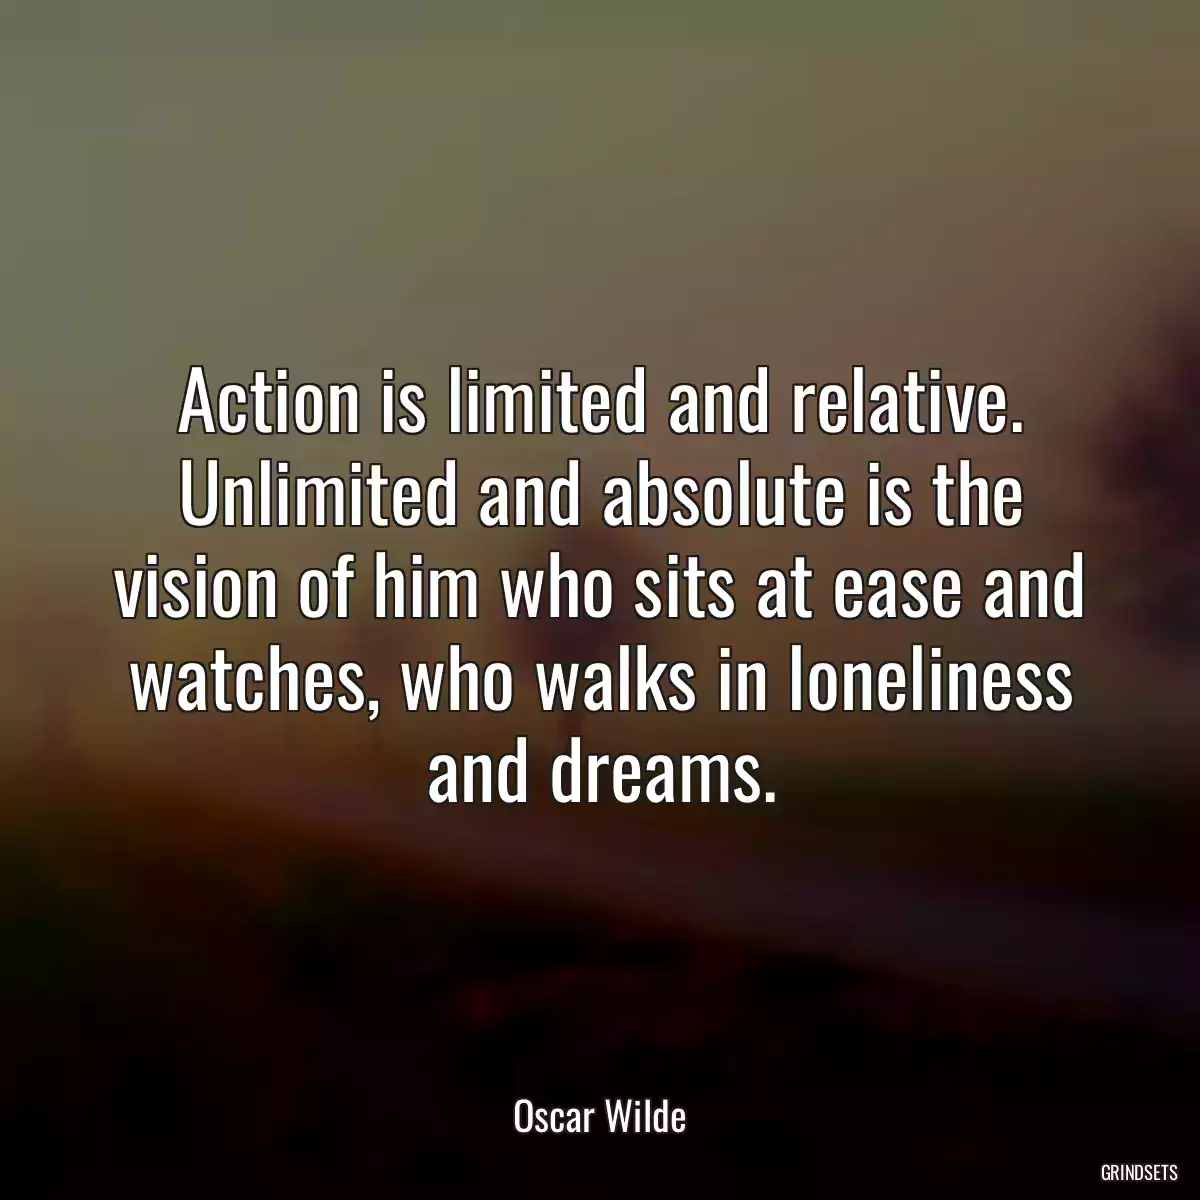 Action is limited and relative. Unlimited and absolute is the vision of him who sits at ease and watches, who walks in loneliness and dreams.